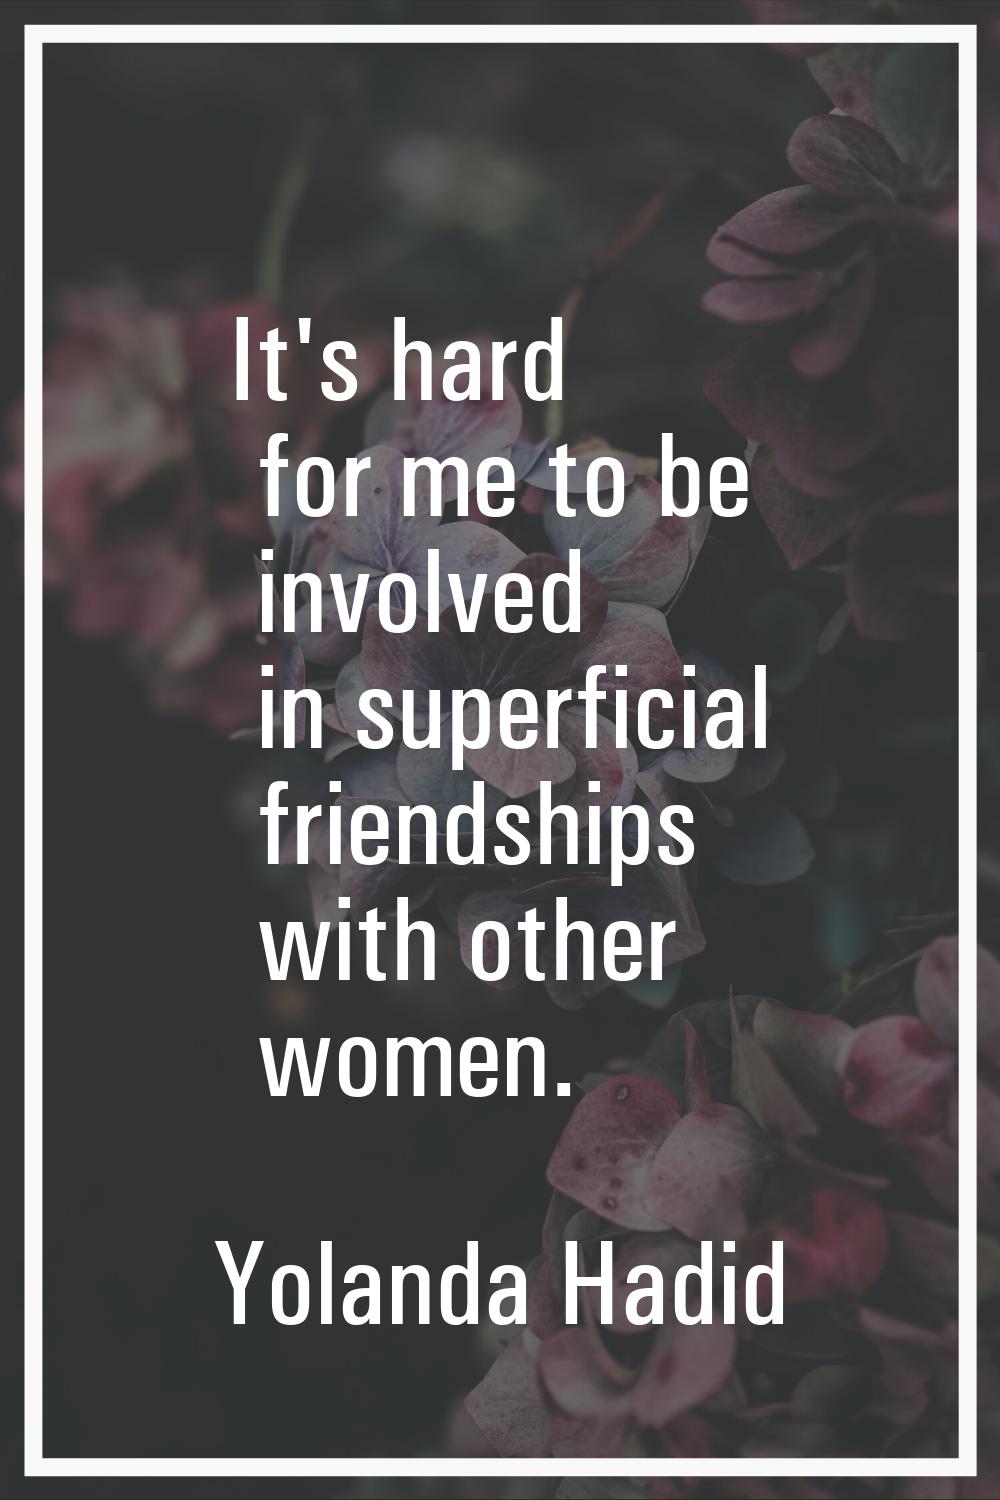 It's hard for me to be involved in superficial friendships with other women.